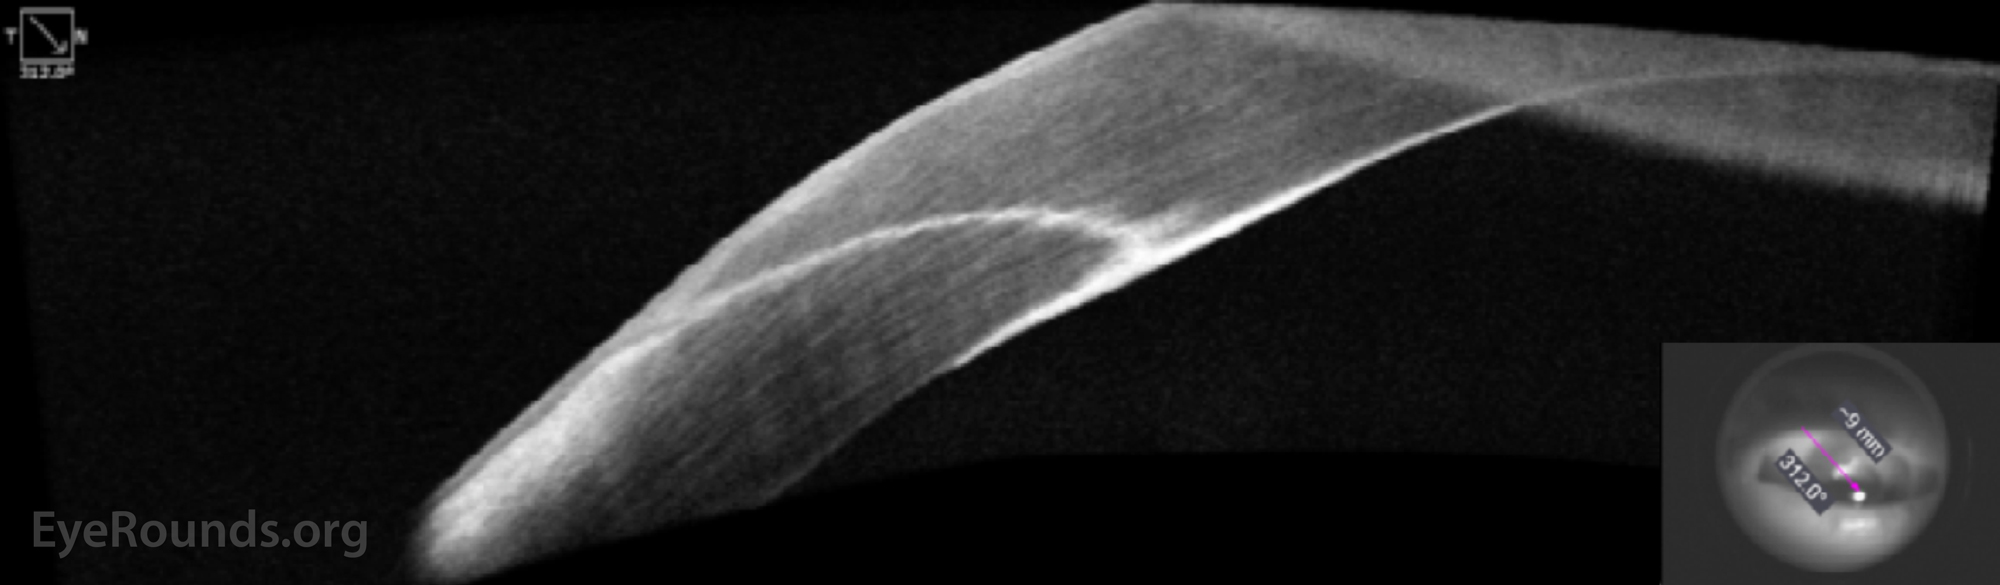 Optical coherence tomography of the anterior segment demonstrating a hyperreflective sheet of presumed epithelial cells